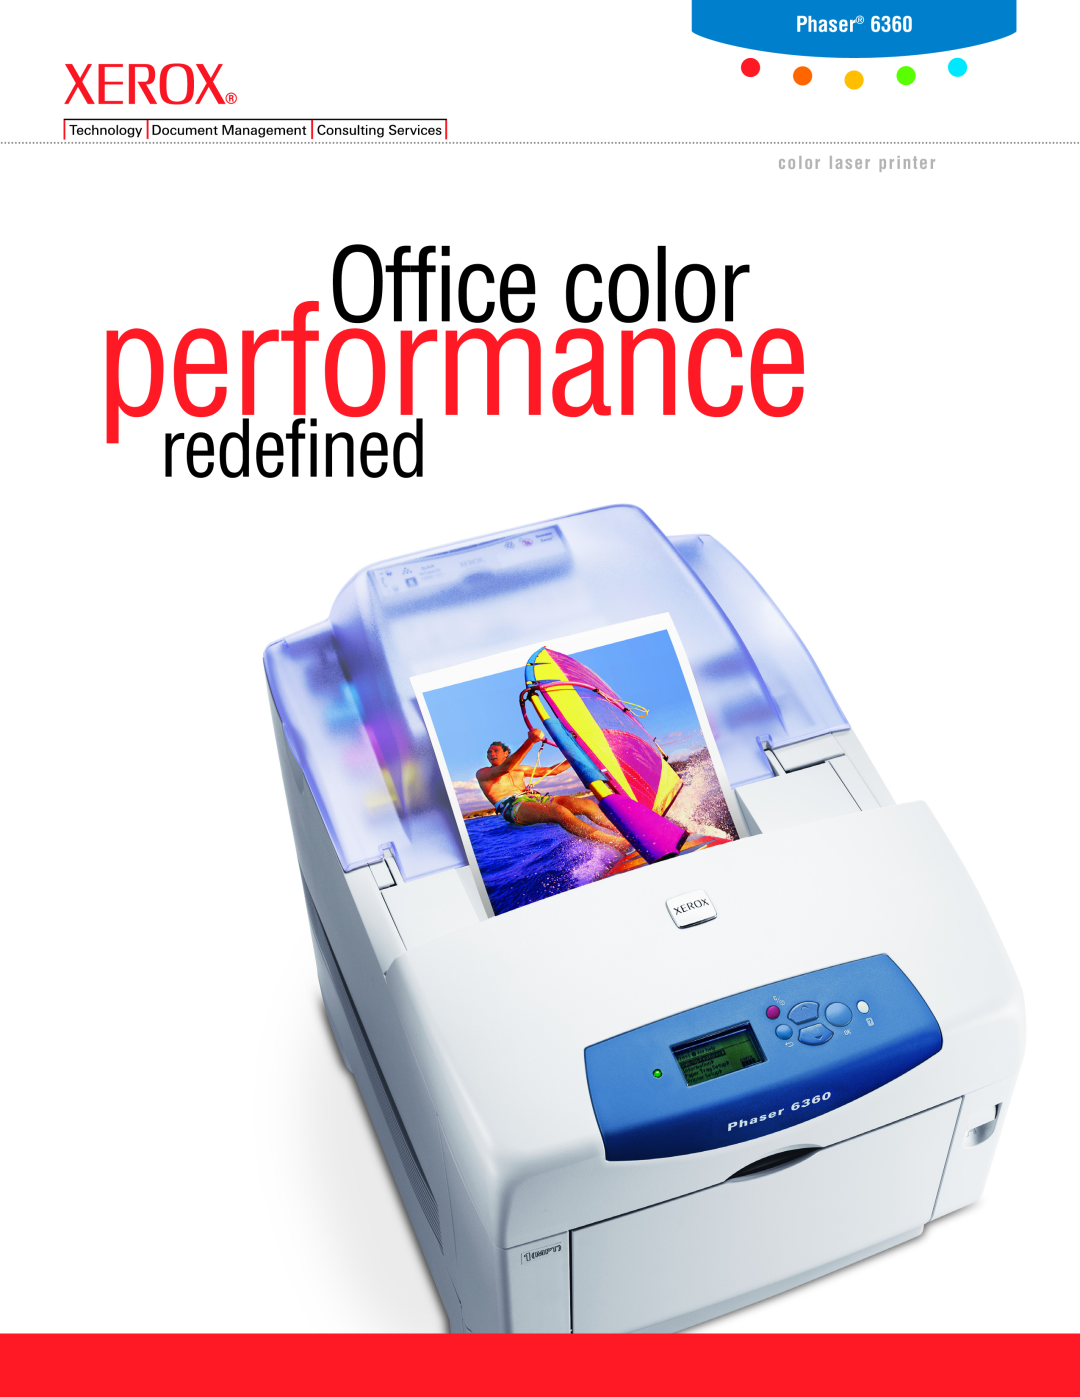 Xerox 6360 manual Phaser, performance, Office color, redefined, color laser printer 